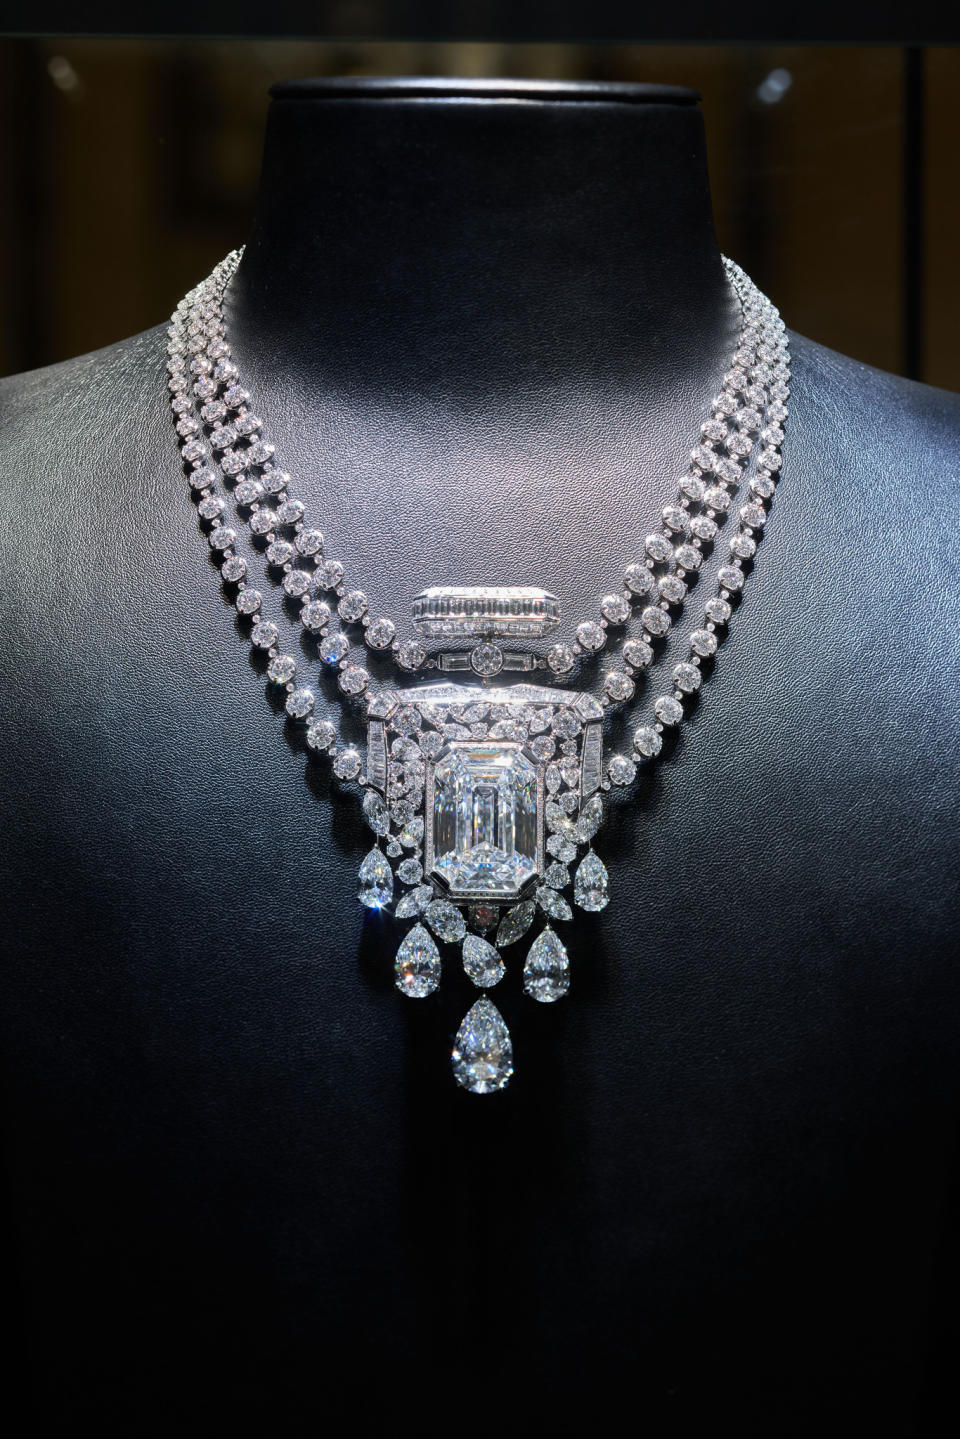 Chanel Fine Jewelry Flagship on Fifth Avenue